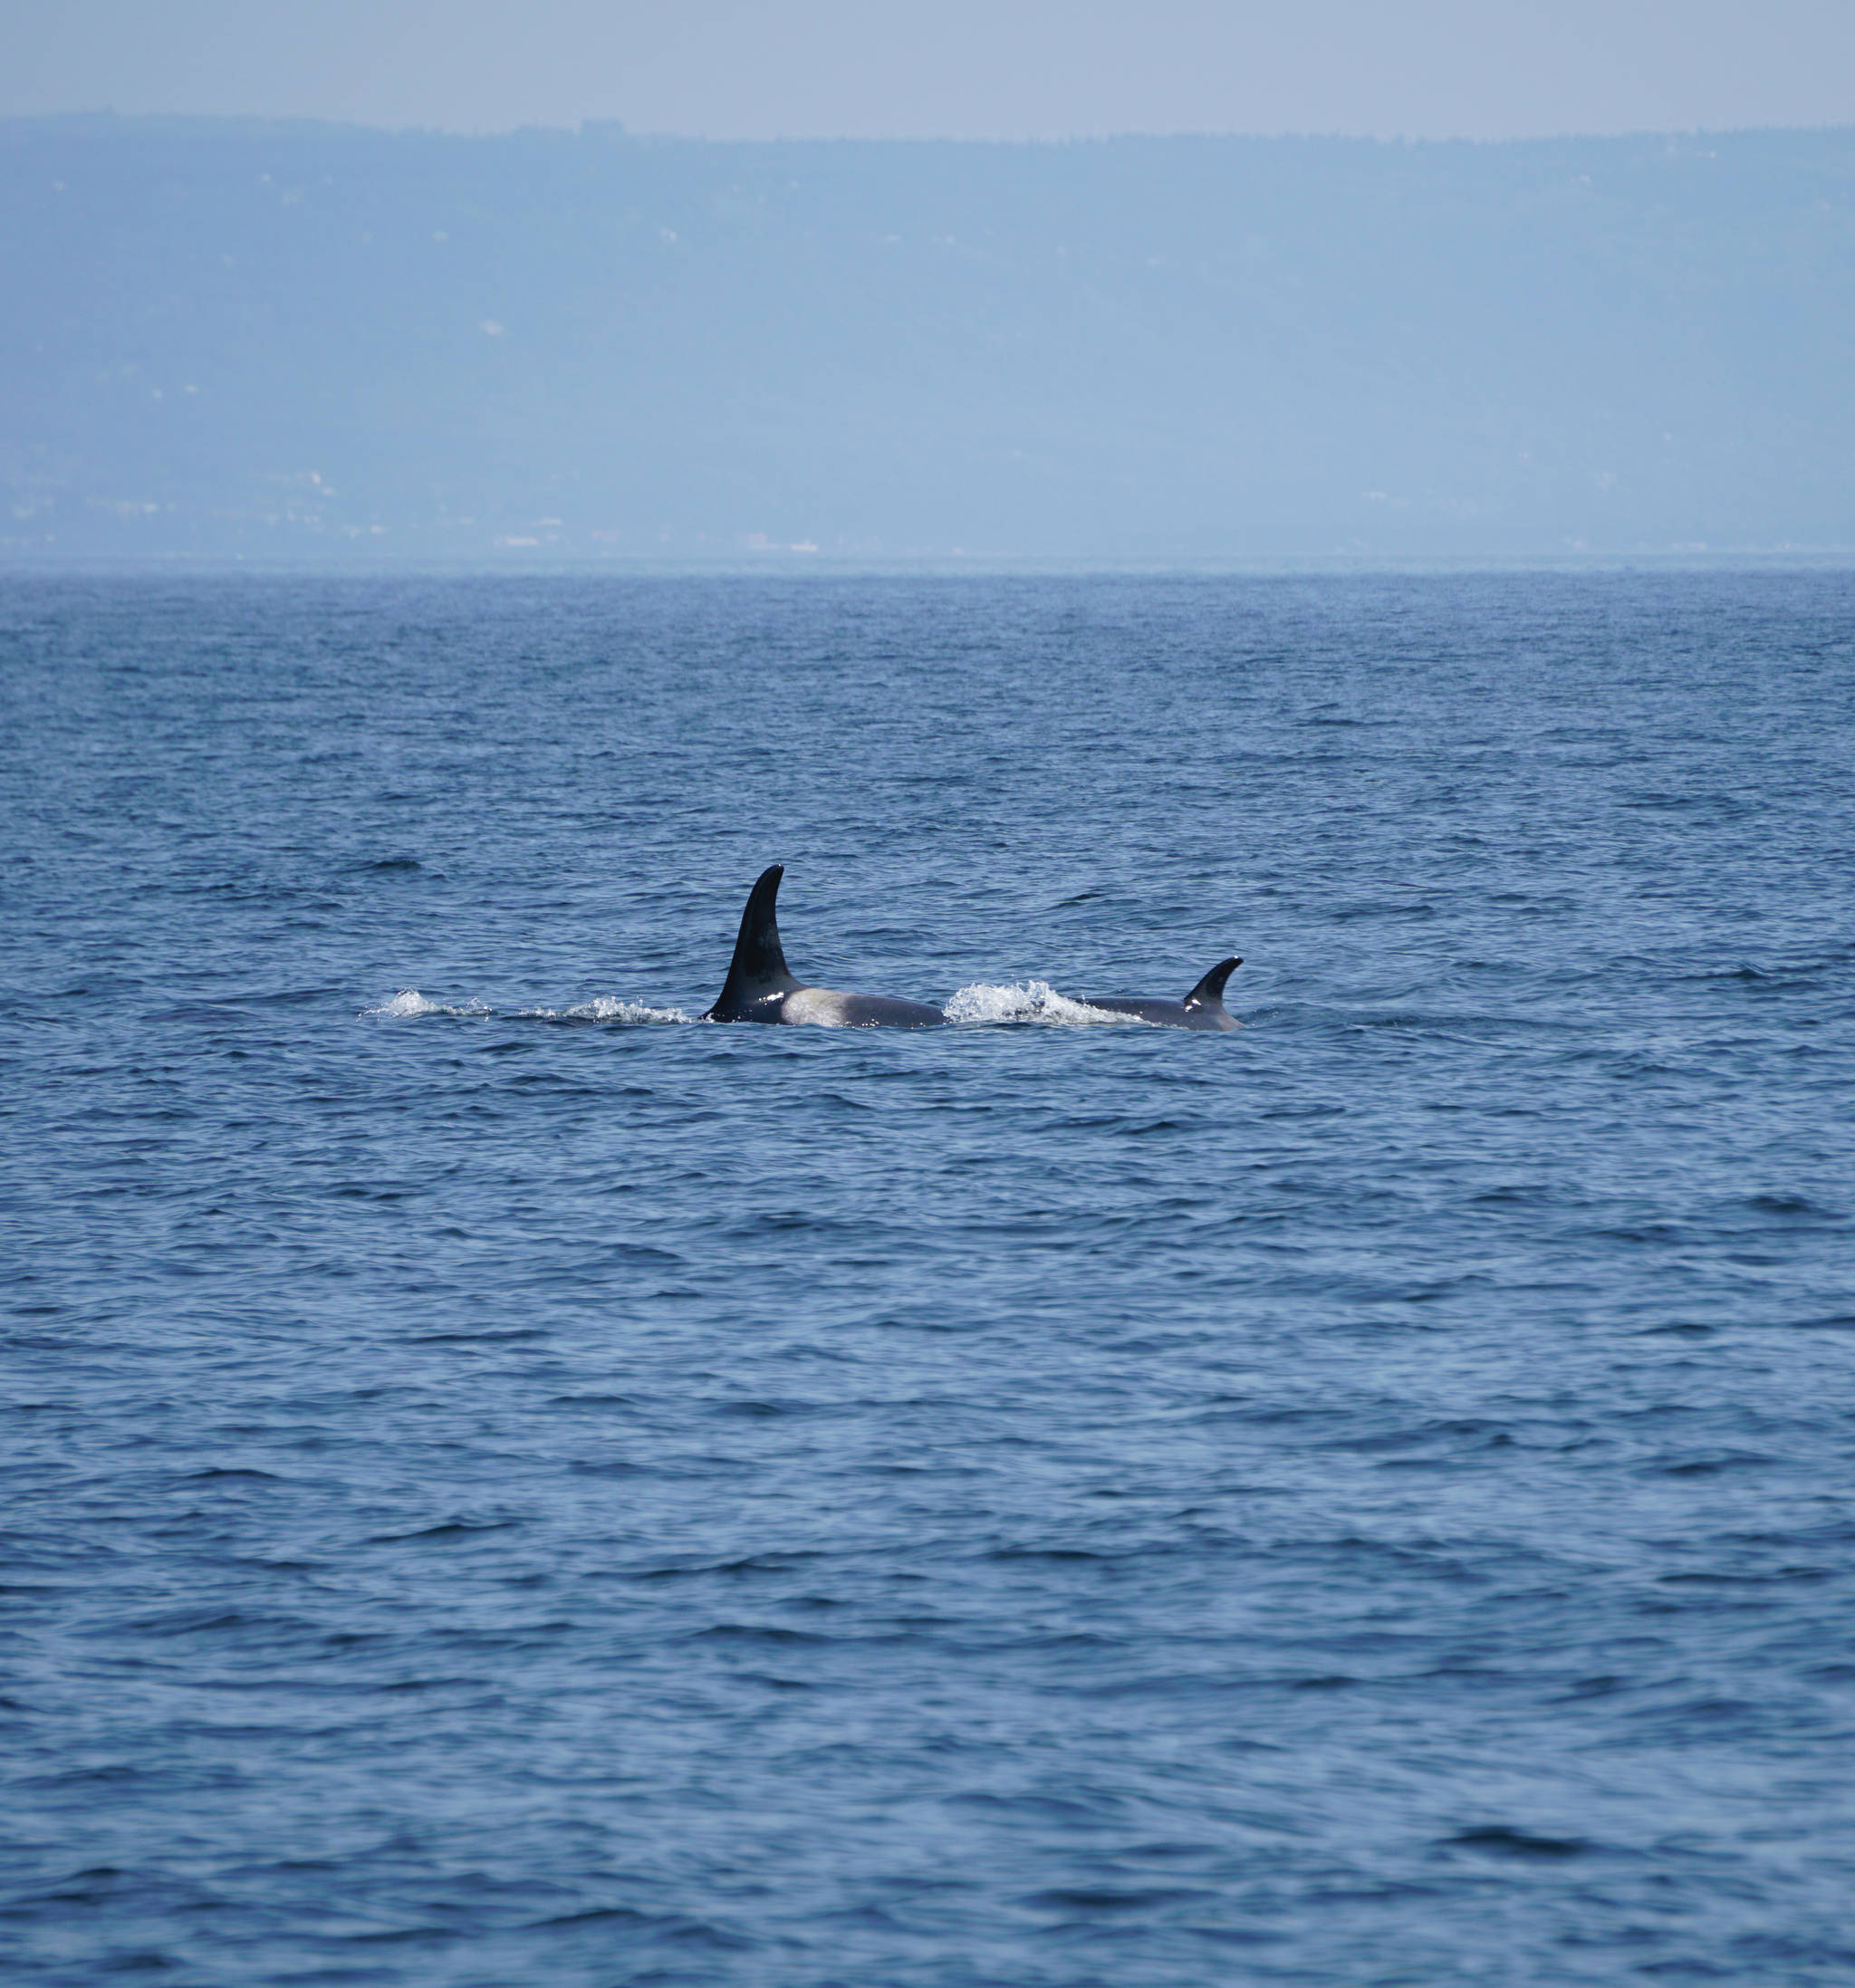 Two orca whales swims in Kachemak Bay on Sunday, July 18, 2021, near Seldovia, Alaska. (Photo by Michael Armstrong/Homer News)